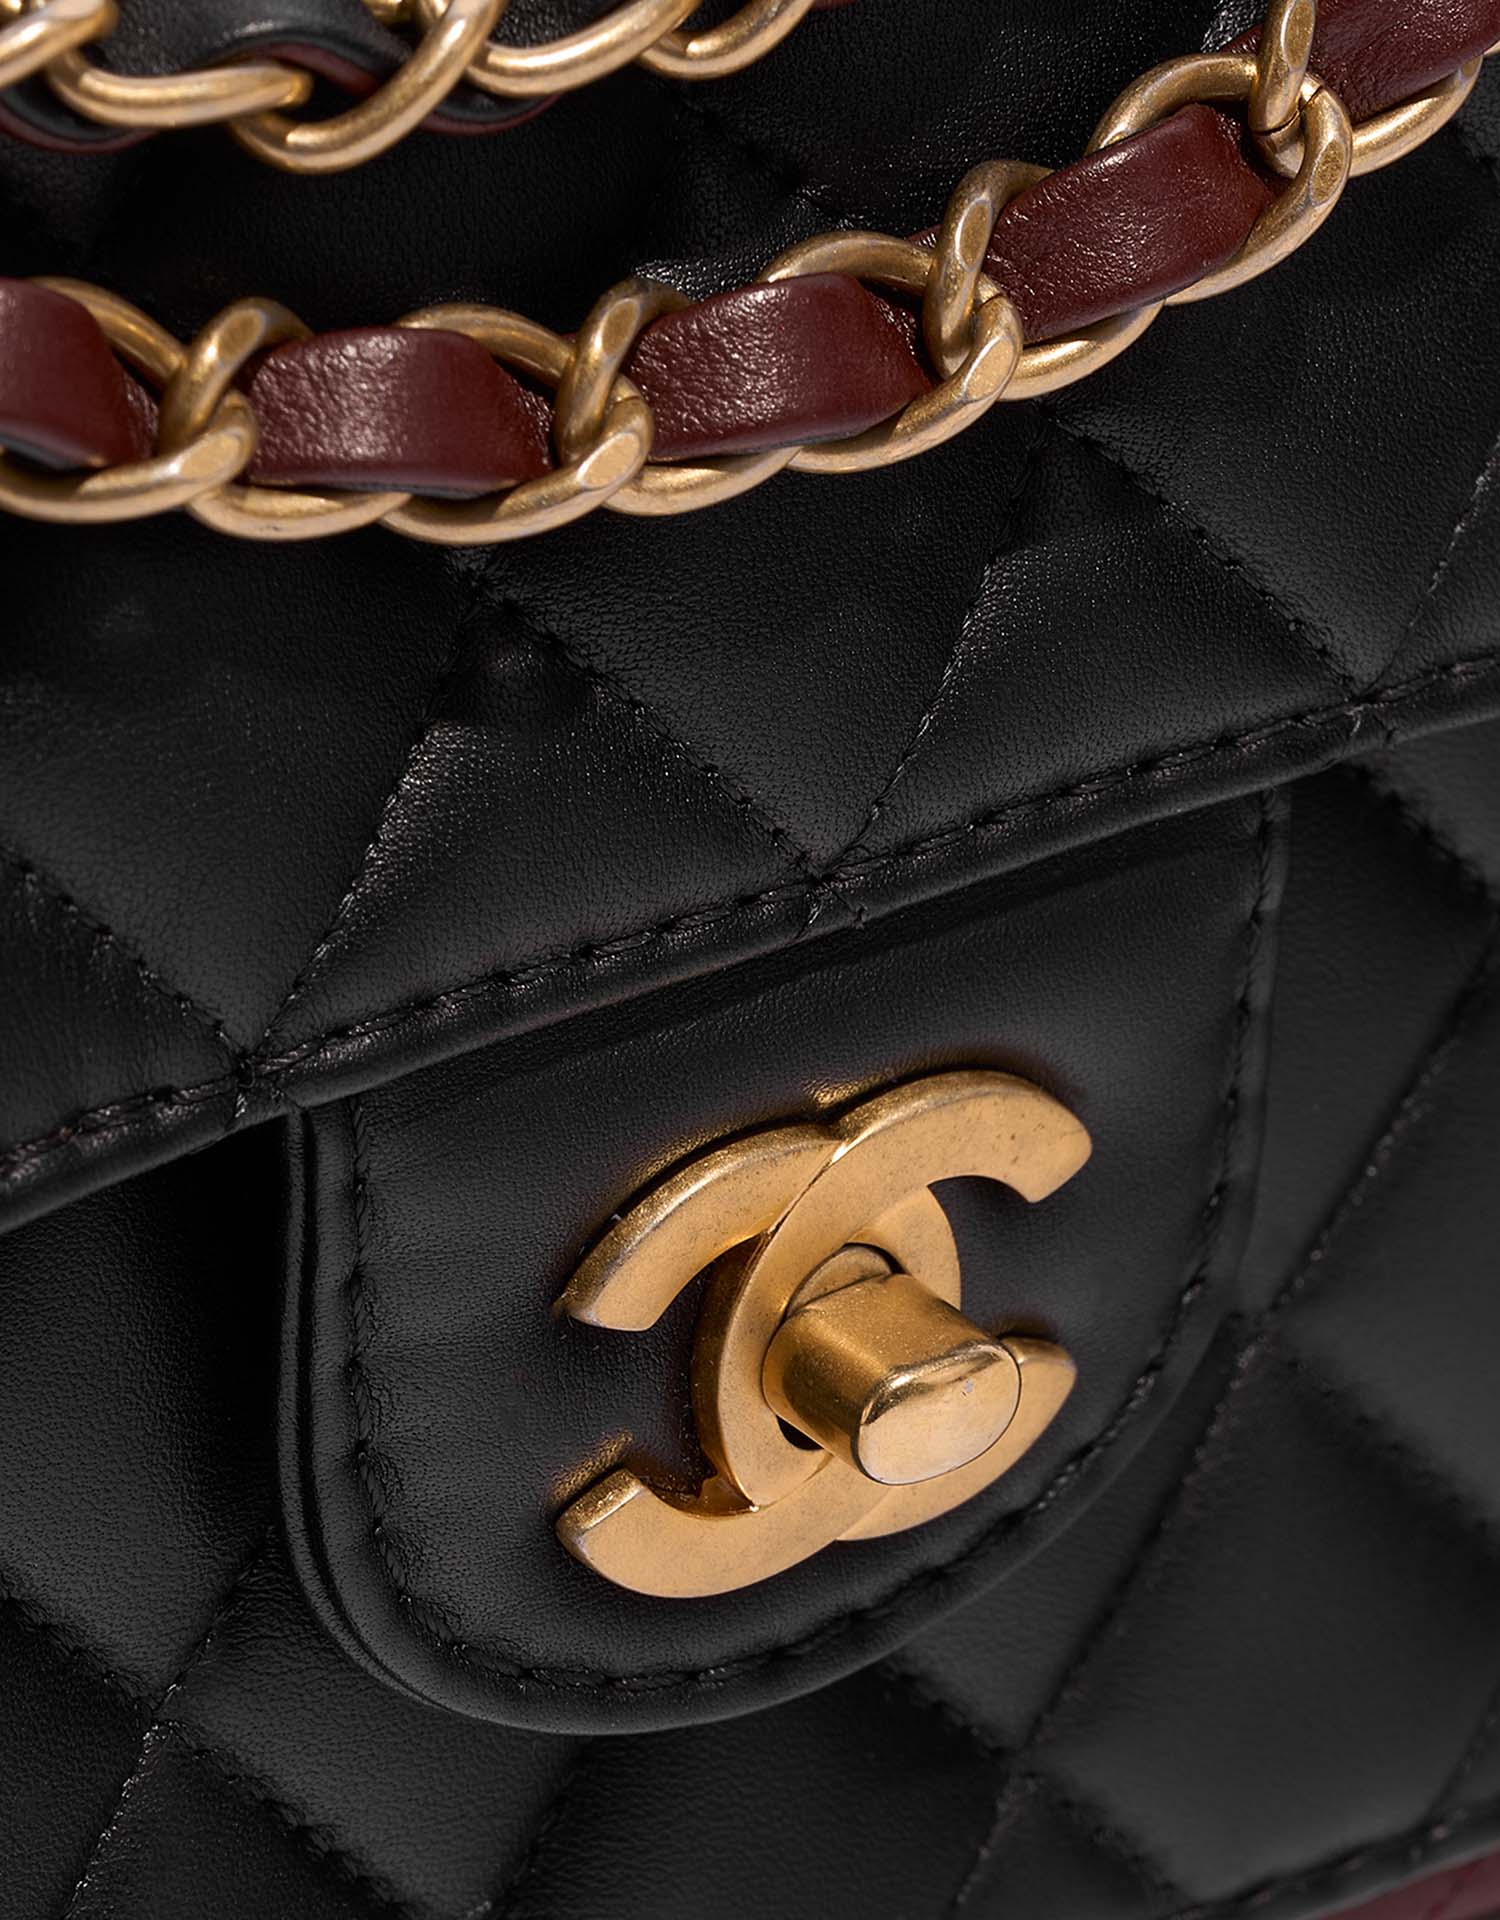 How to Clean, Store and Care for Your Chanel Bag